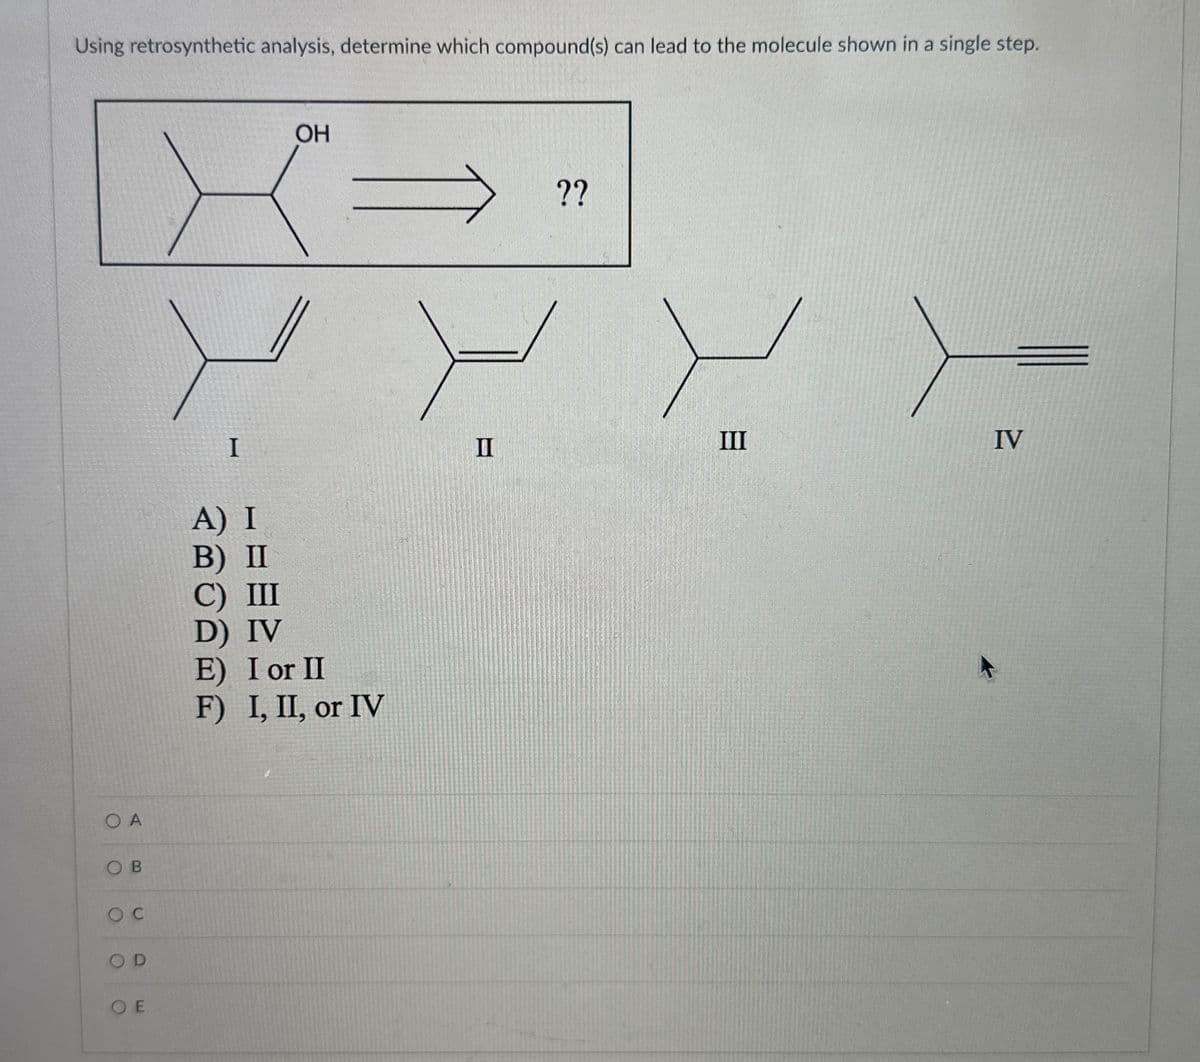 Using retrosynthetic analysis, determine which compound(s) can lead to the molecule shown in a single step.
OA
OB
oc
OD
OE
I
A) I
B) II
C) III
D) IV
OH
E) I or II
F) I, II, or IV
??
III
IV
II